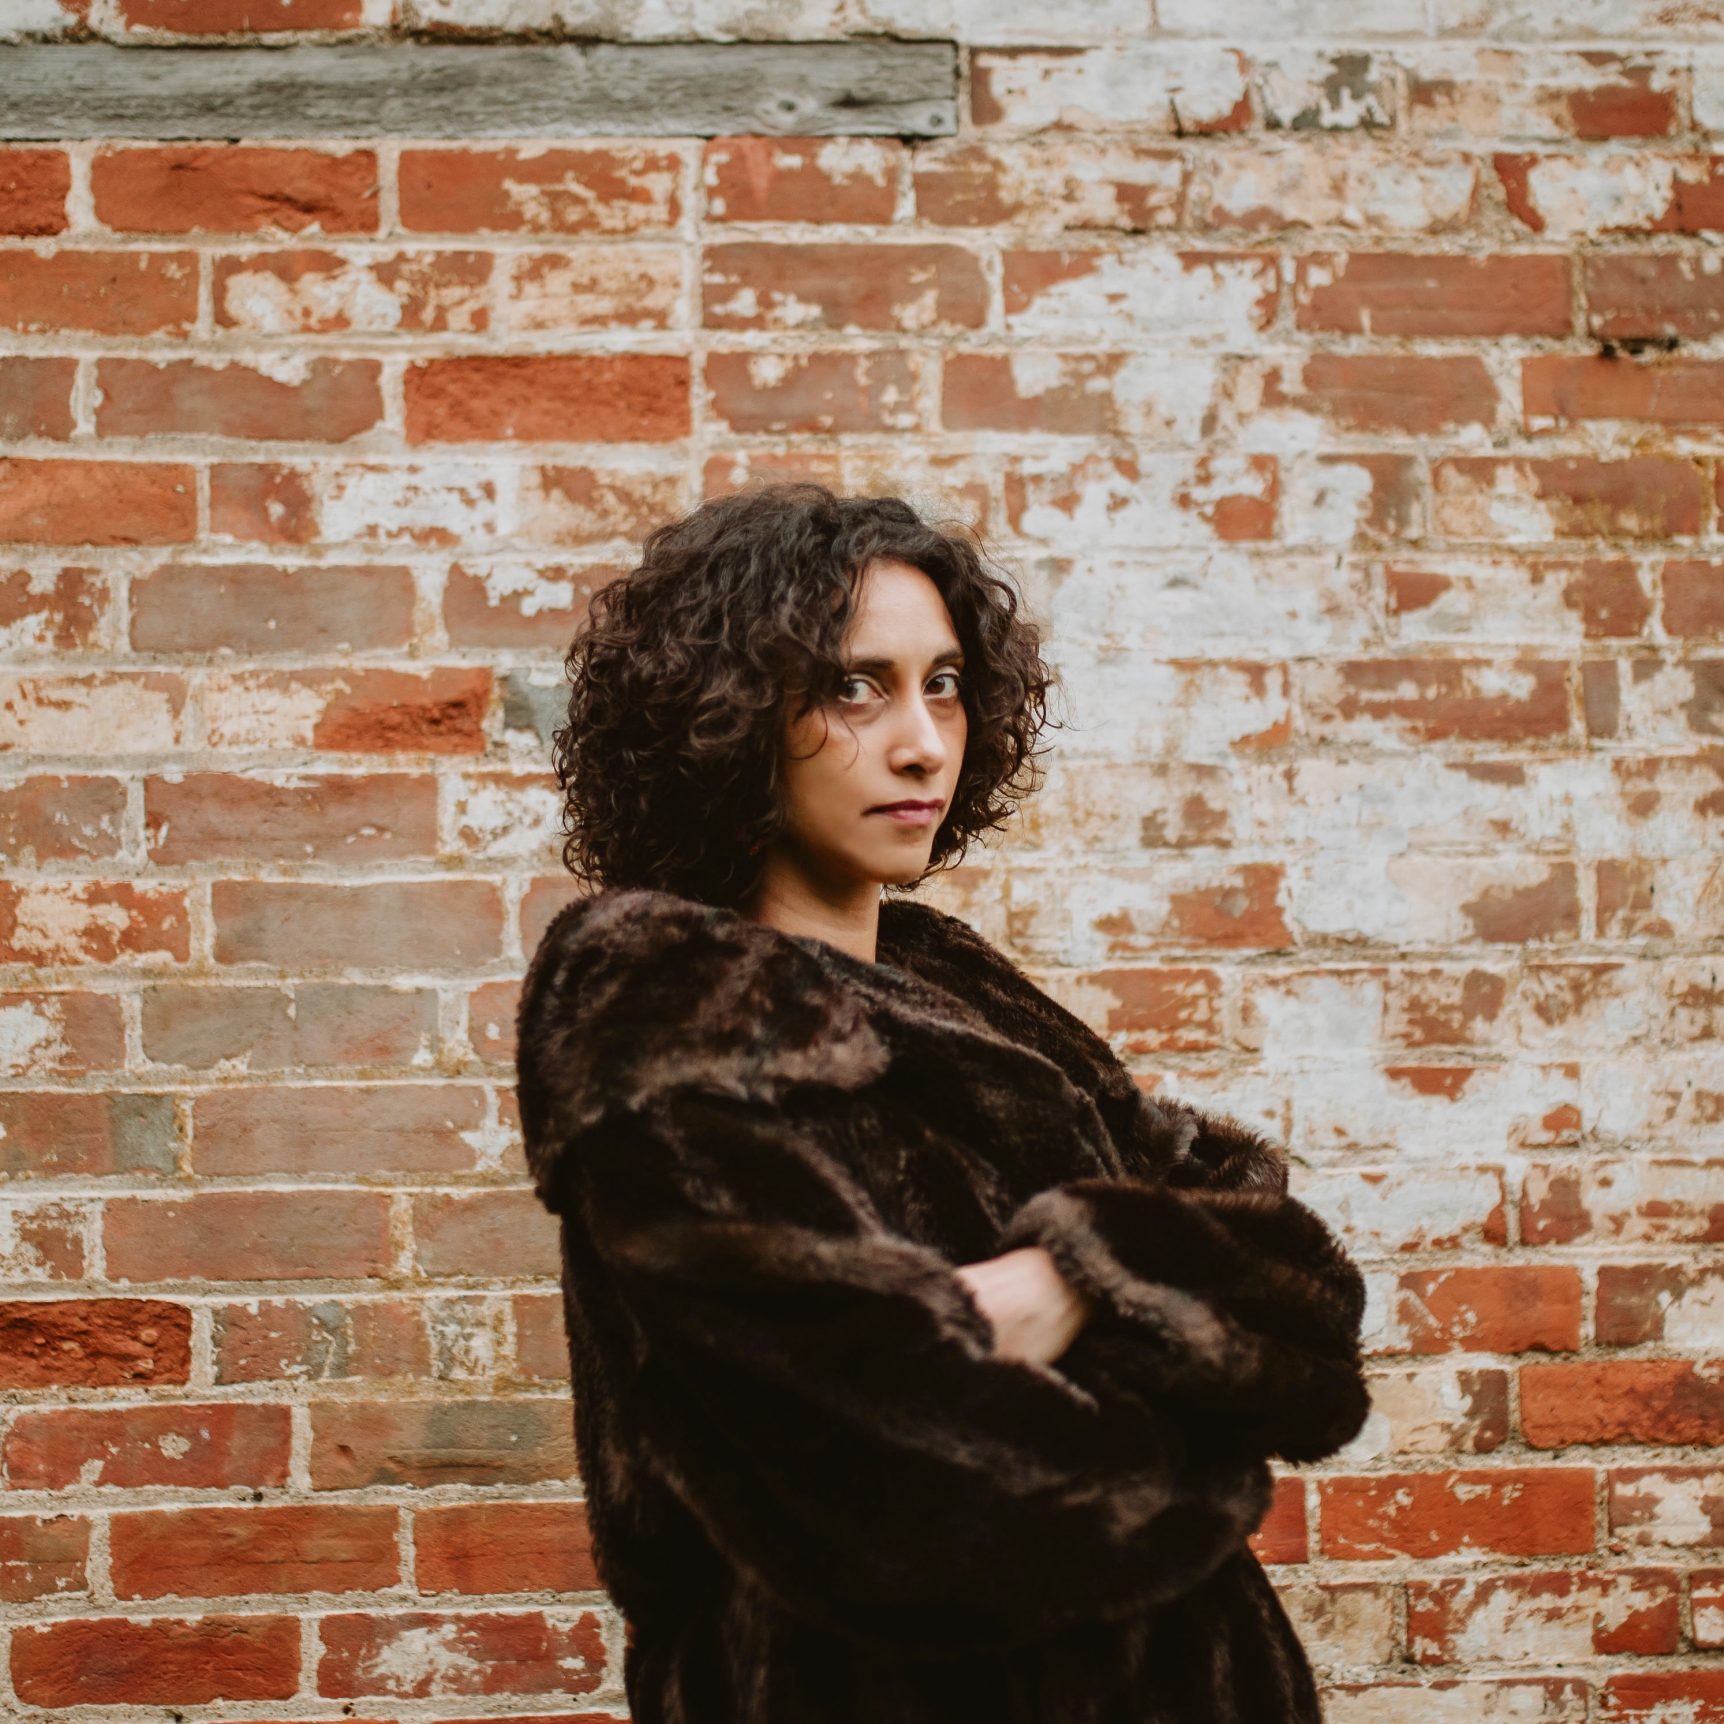 Bethany stands sideways in front of a distressed red brick wall with her arms folded and a brown fur coat on. She looks sternly into the camera and her curly brown hair frames her face.